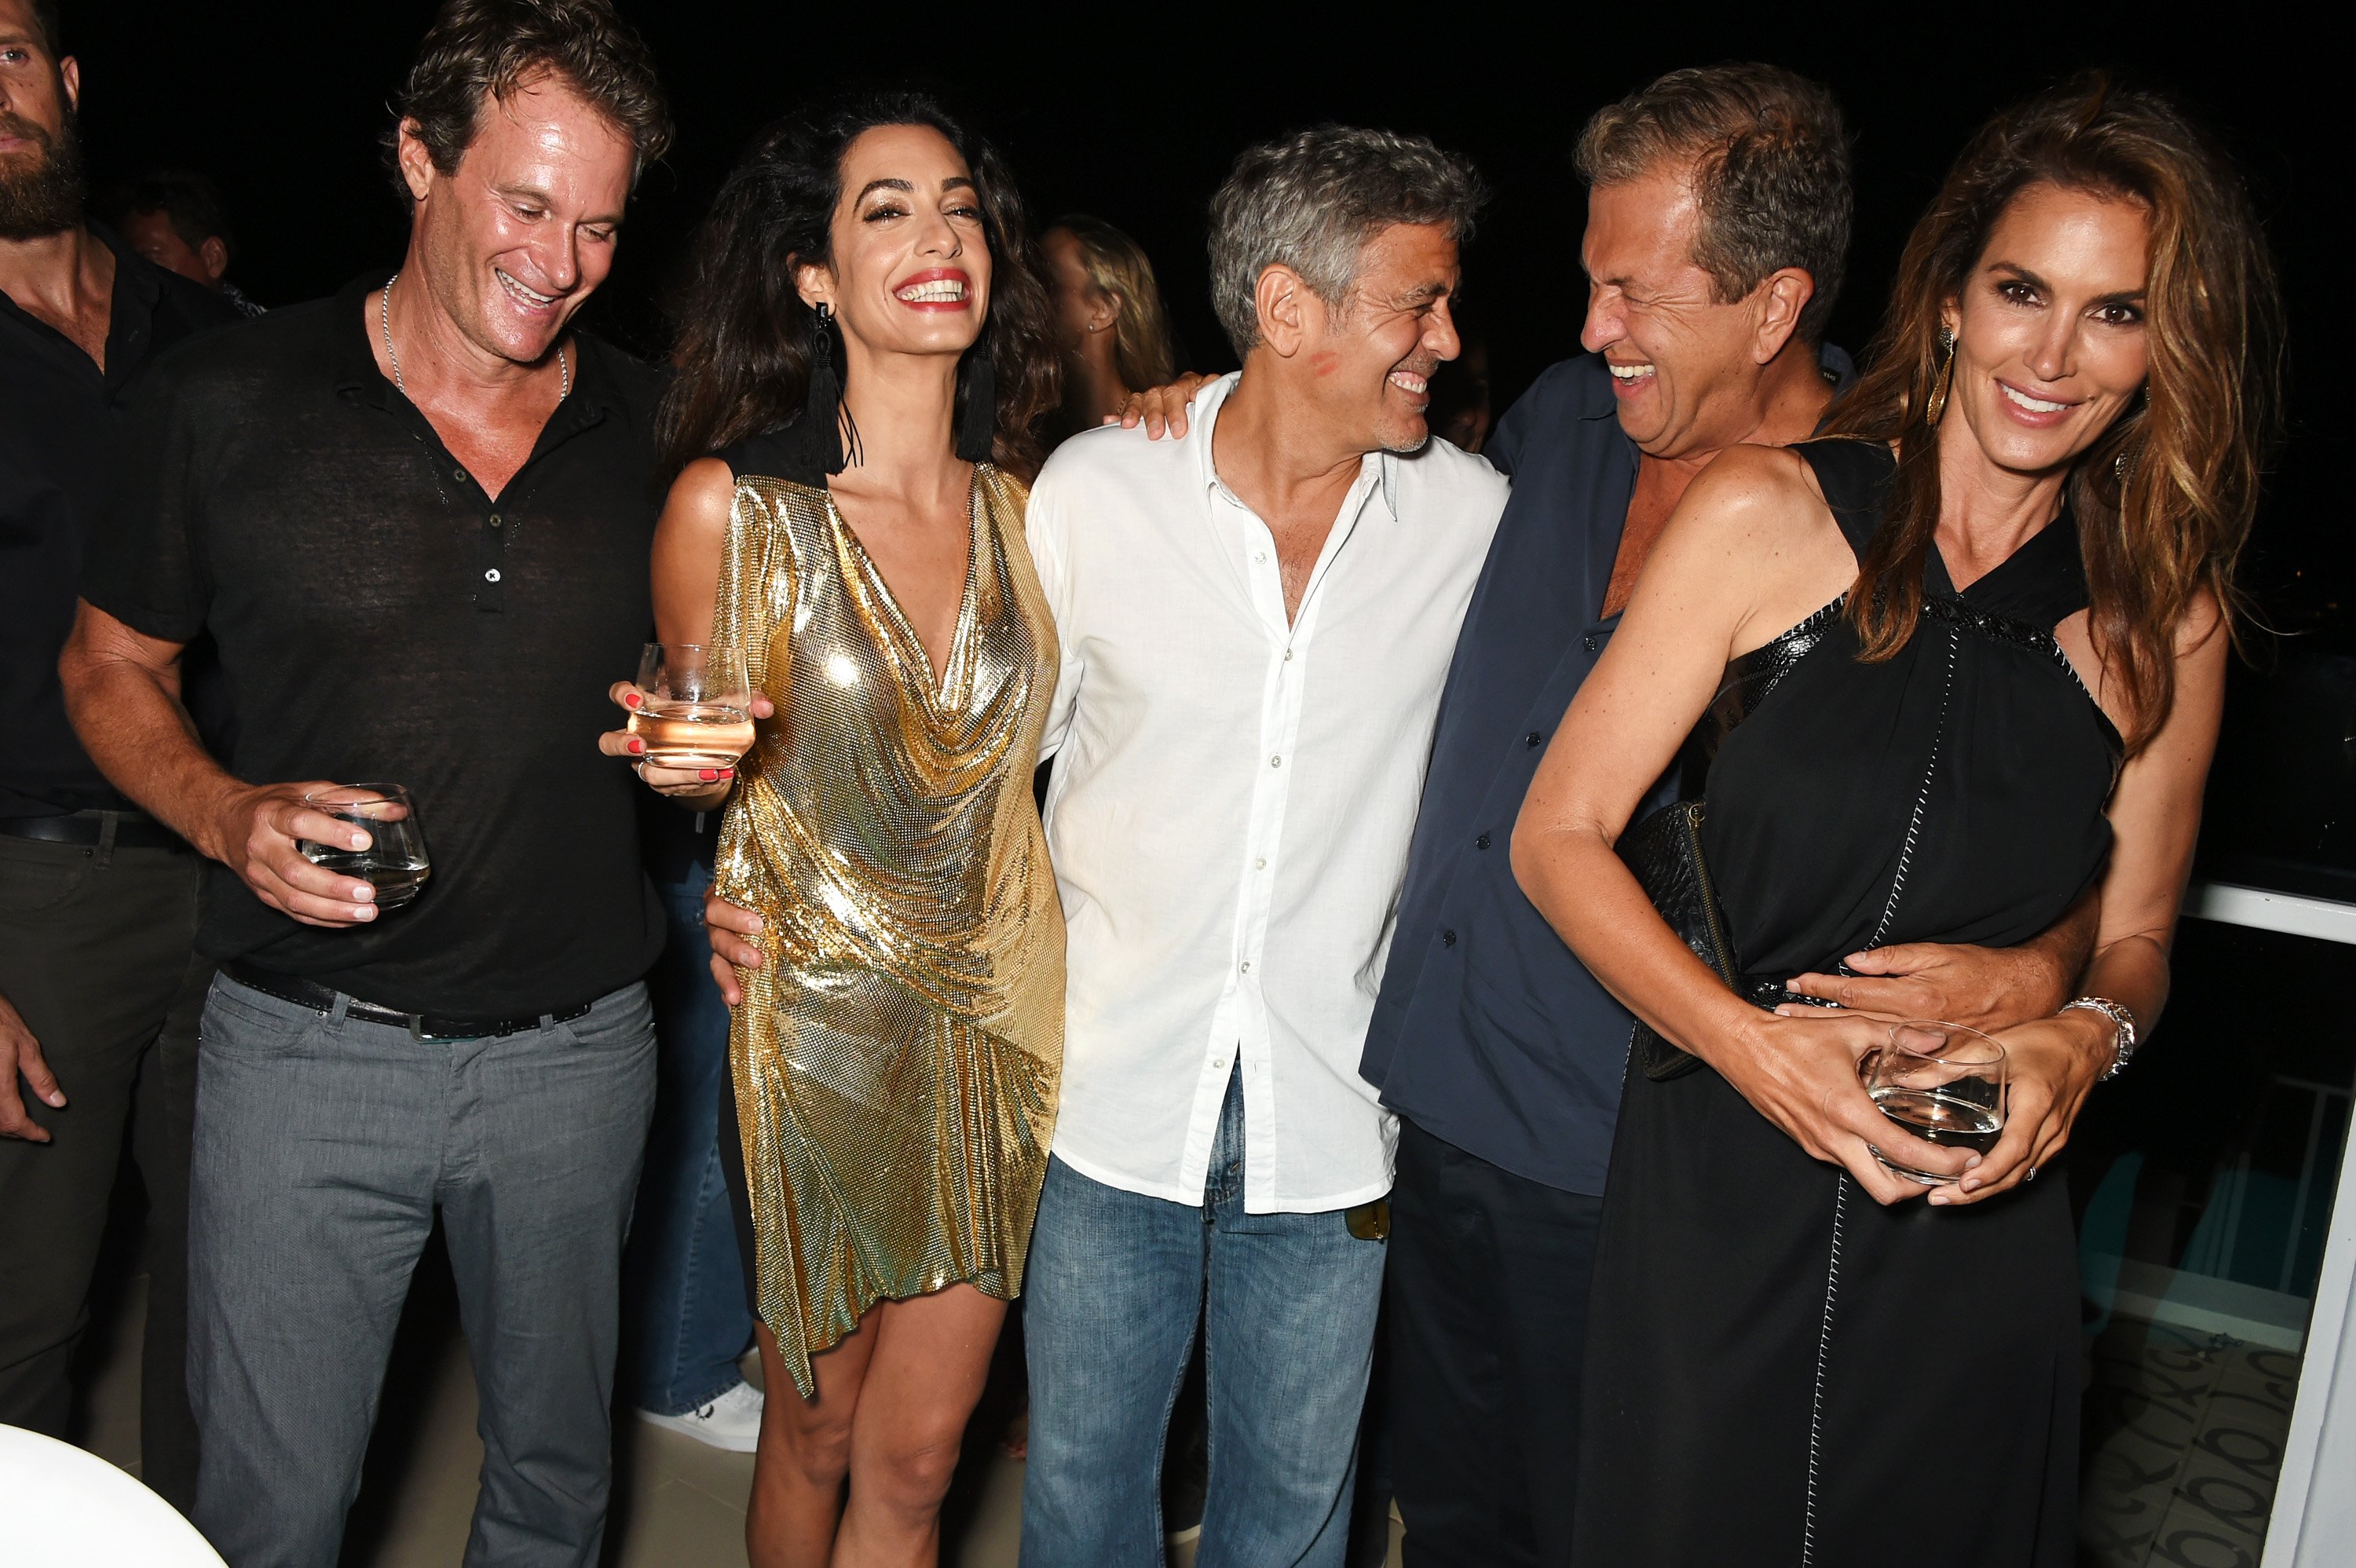 Mike Meldman, Amal Clooney, her husband George Clooney, Rande Gerber, and his wife Cindy Crawford at the official launch of Casamigos Tequila in Ibiza and Spain at Ushuaia Ibiza Beach Hotel on August 23, 2015 in Ibiza, Spain | Source: Getty Images